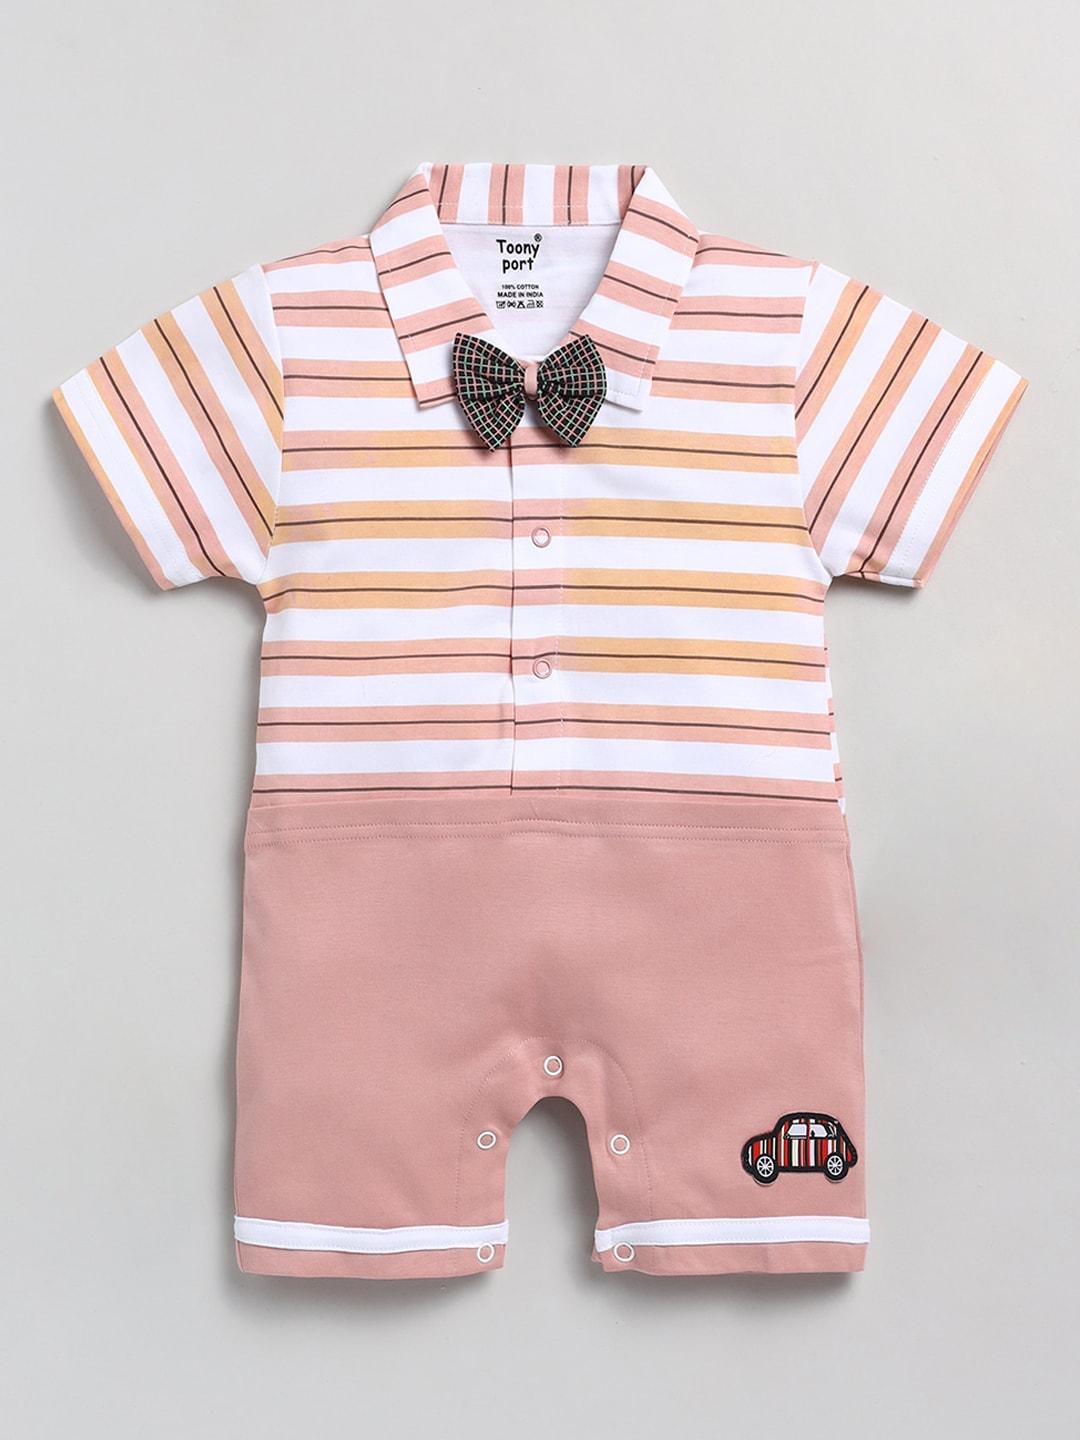 toonyport infant boys striped pure cotton rompers